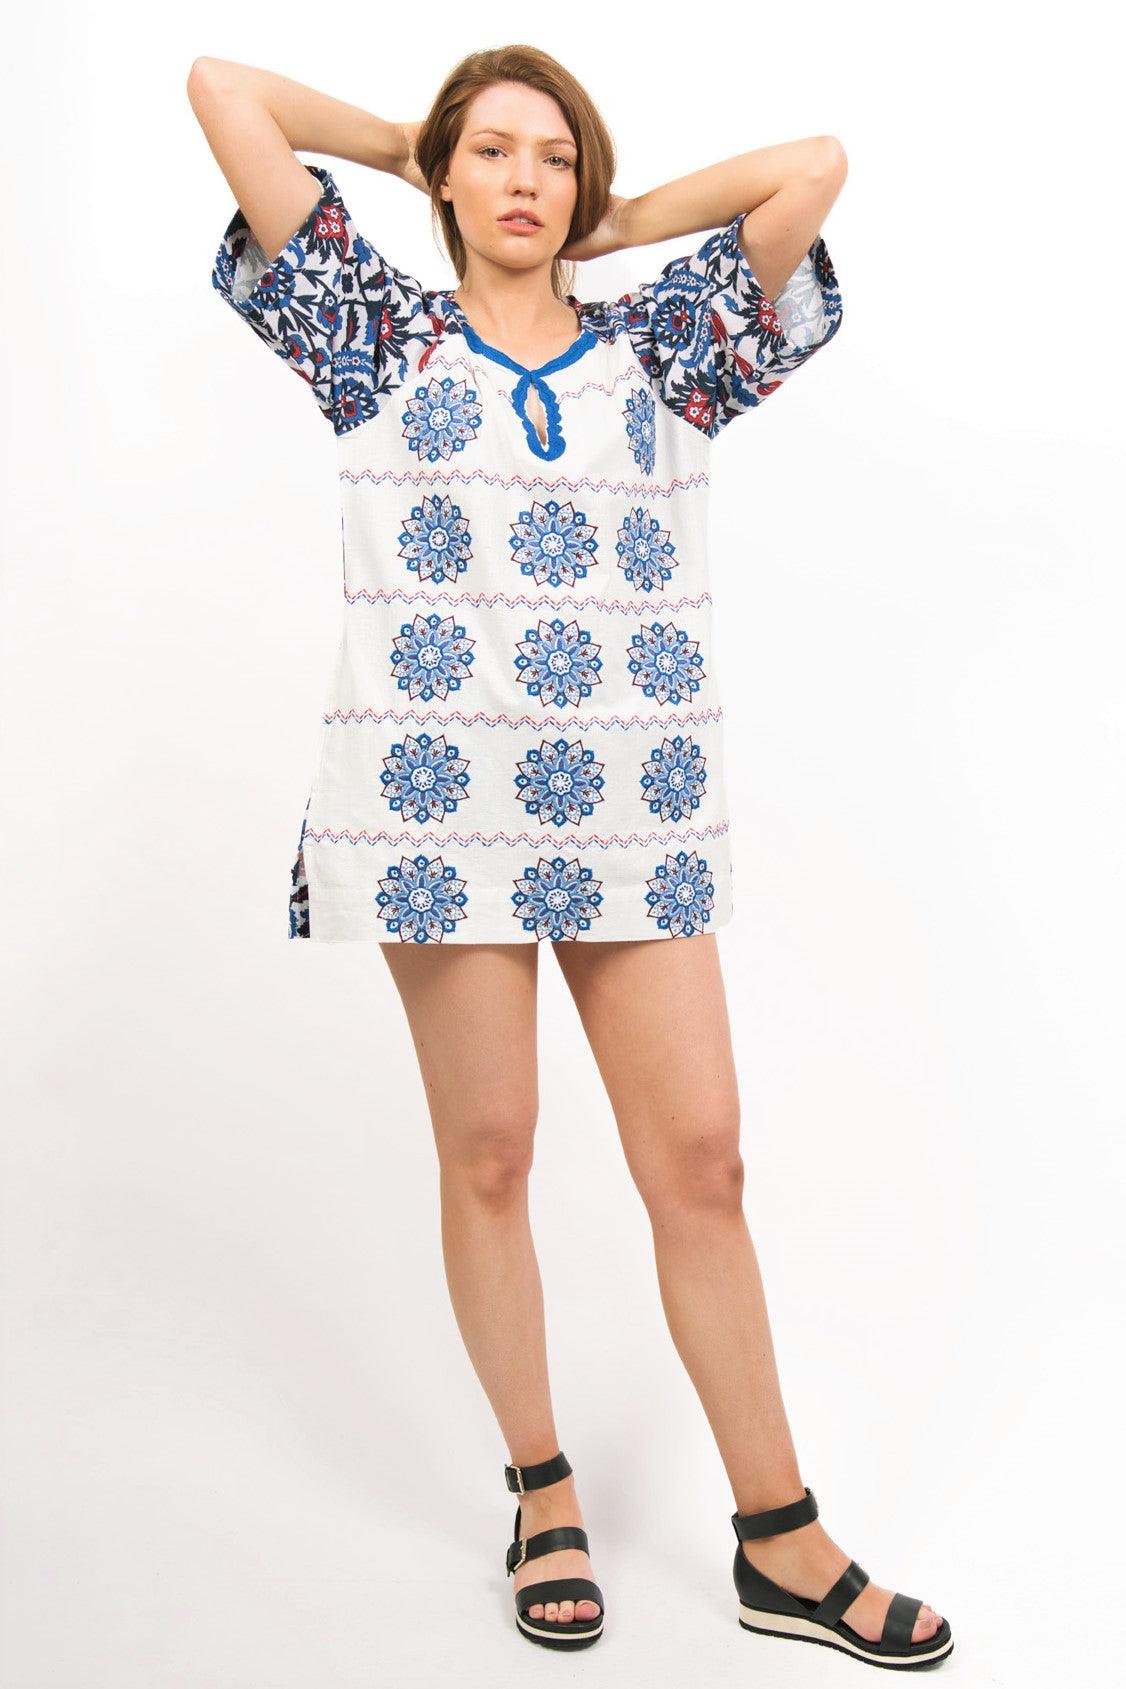 CELESTE EMBROIDERED TUNIC TOP WORN WITH SHORTS AND BLACK SANDALS- FRONT VIEW- zohaonline